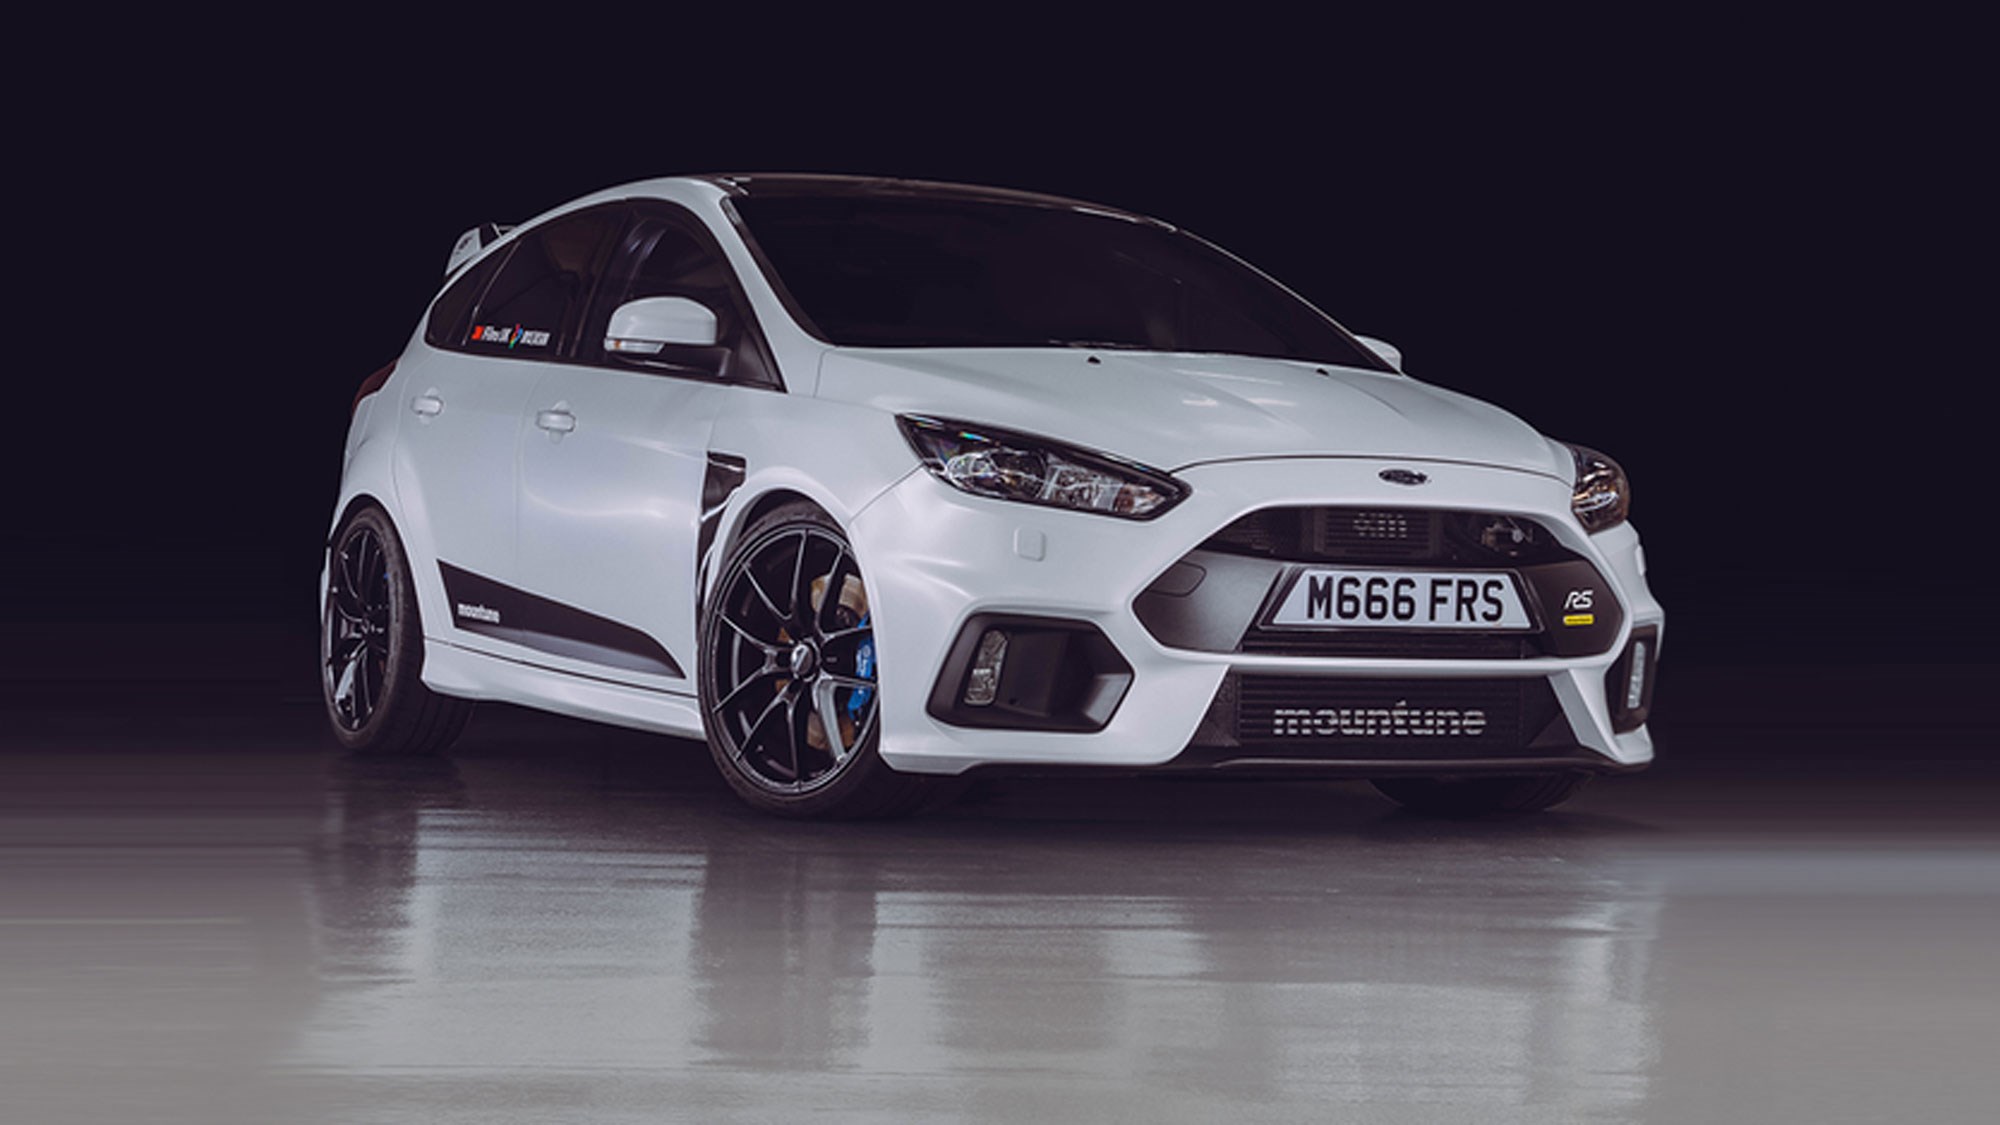 Used car buying guide: Ford Focus RS (Mk3)